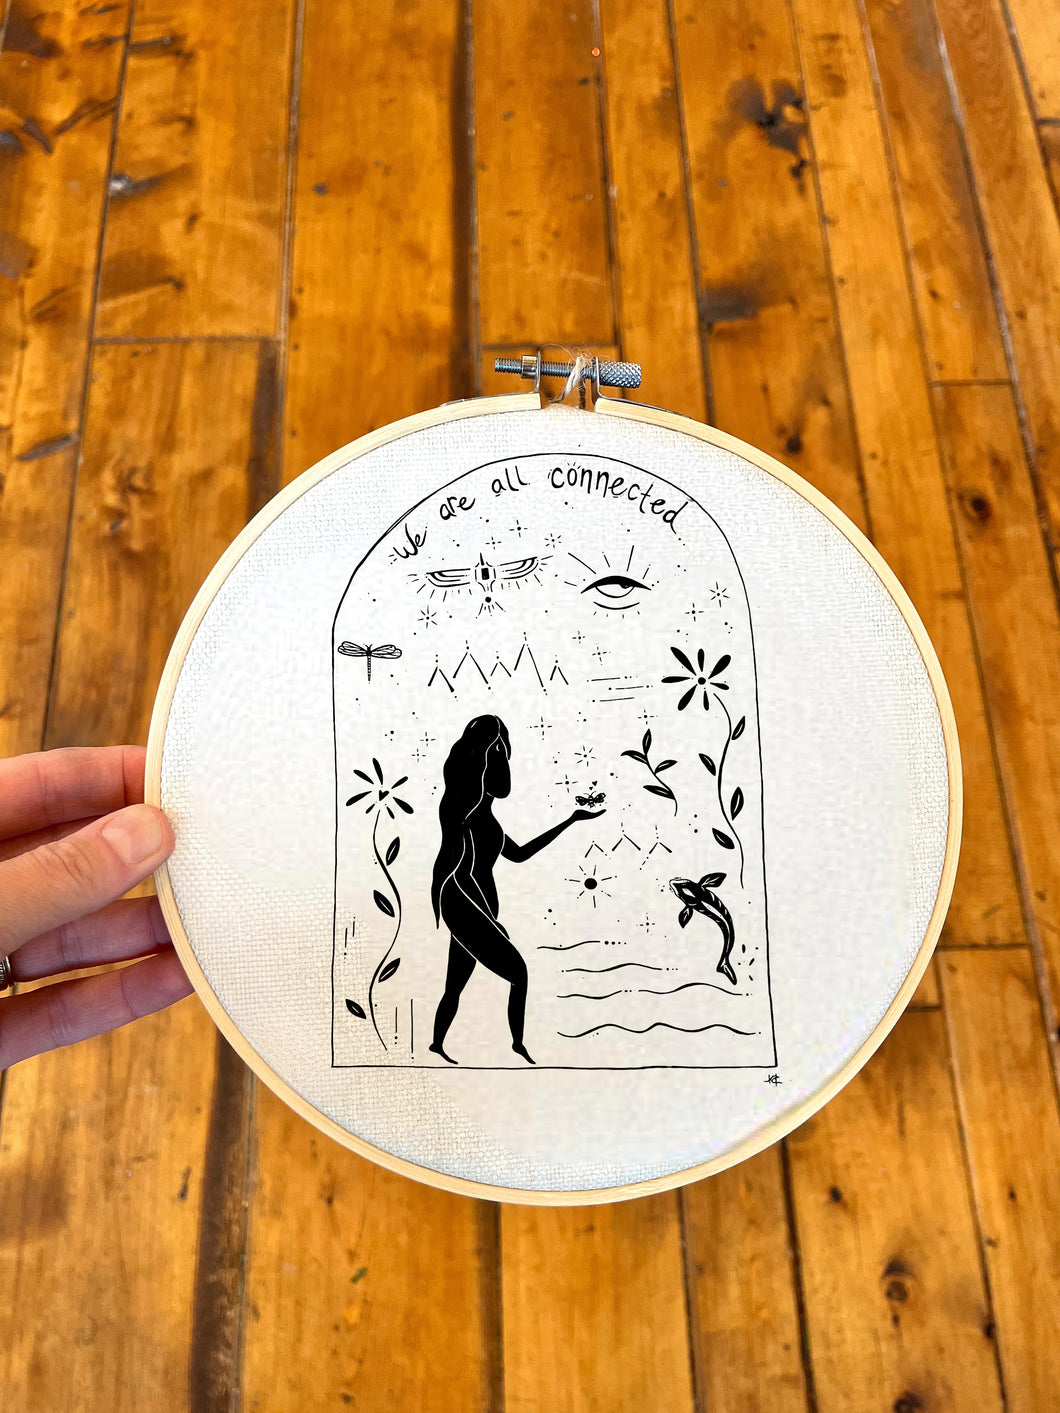 We are all Connected - Circular Wall Hanging